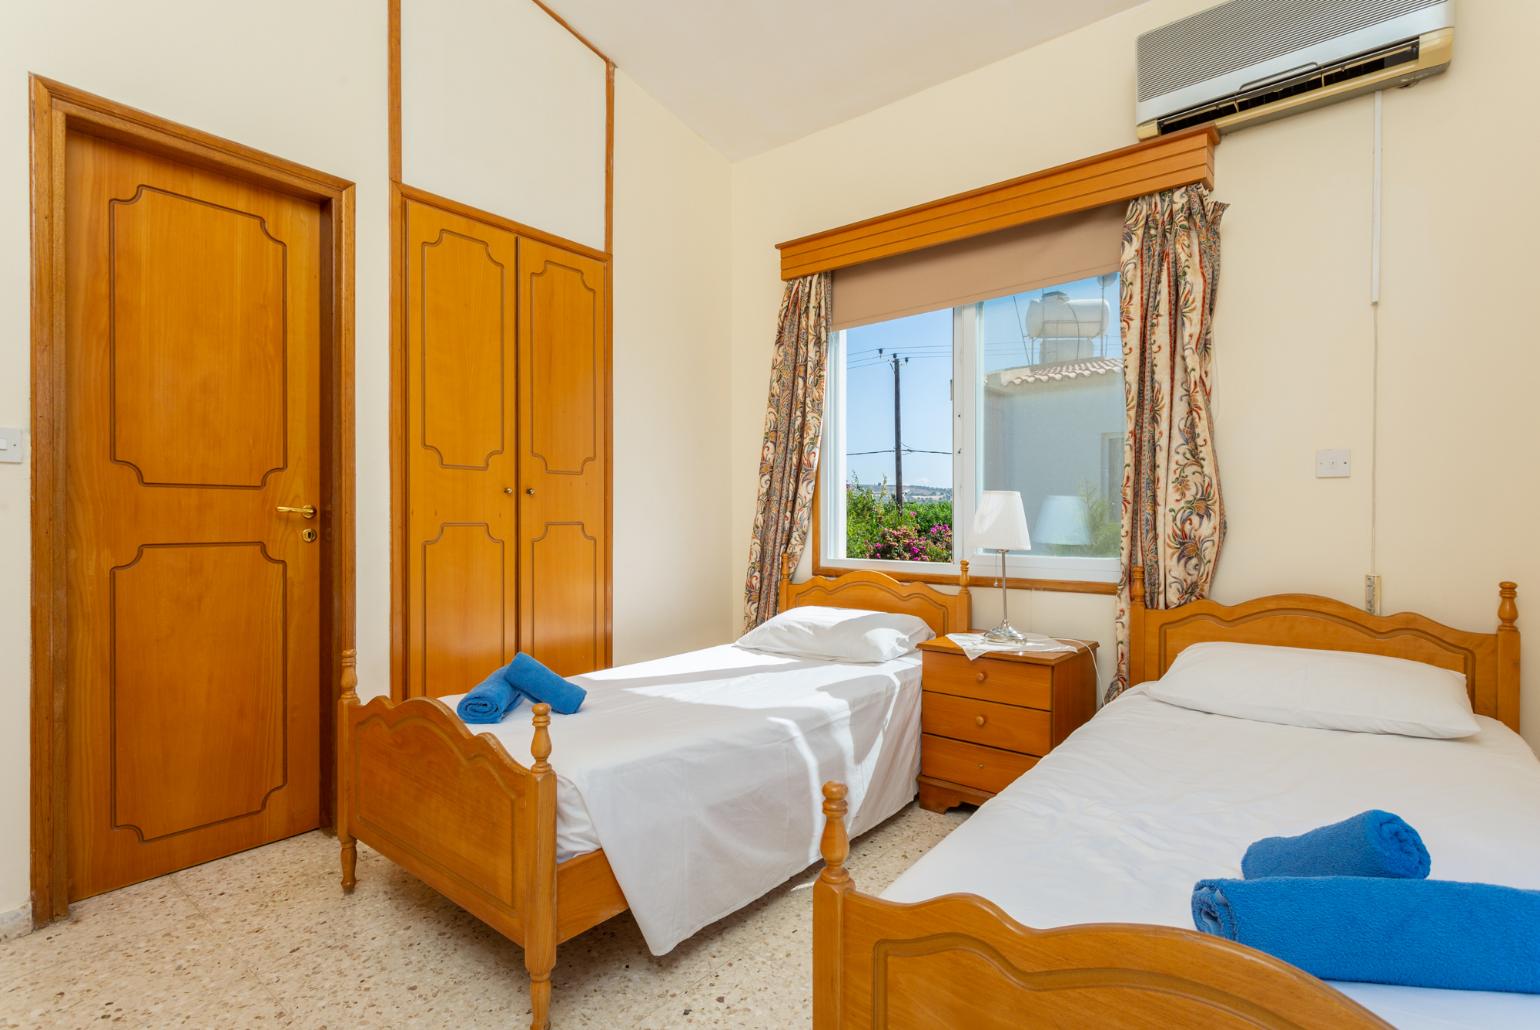 Twin bedroom with en suite bathroom, A/C, and balcony access with sea views